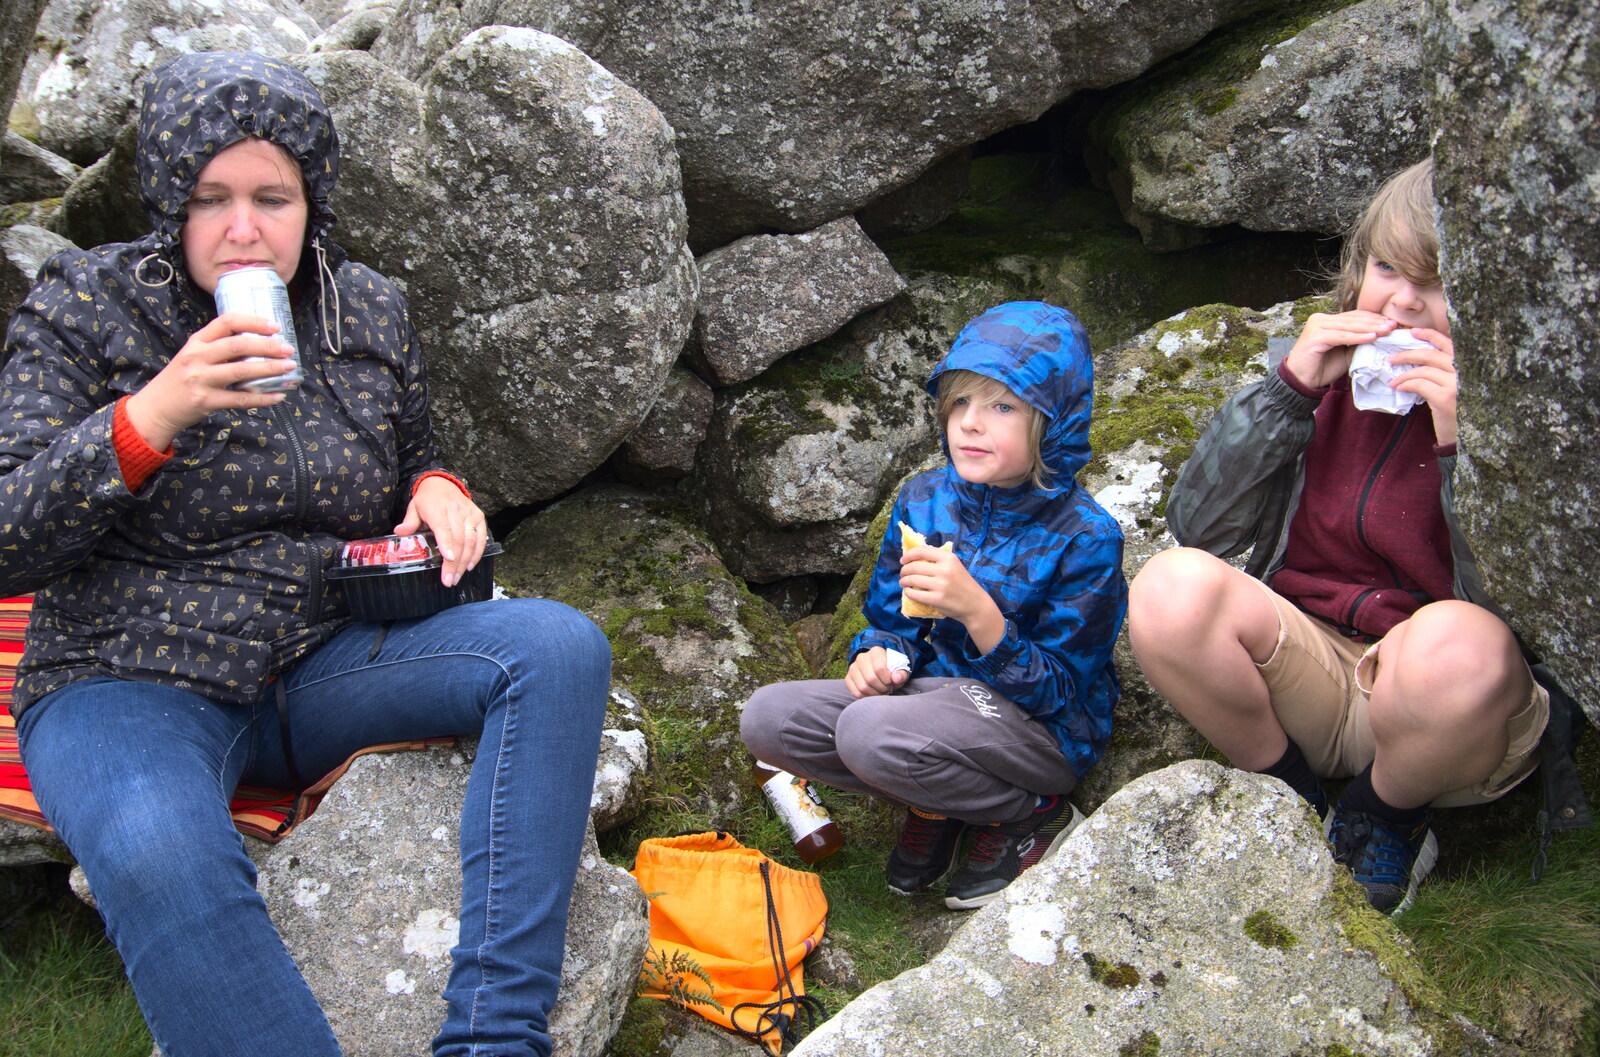 We have a picnic in the rocks from A Walk up Hound Tor, Dartmoor, Devon - 24th August 2020